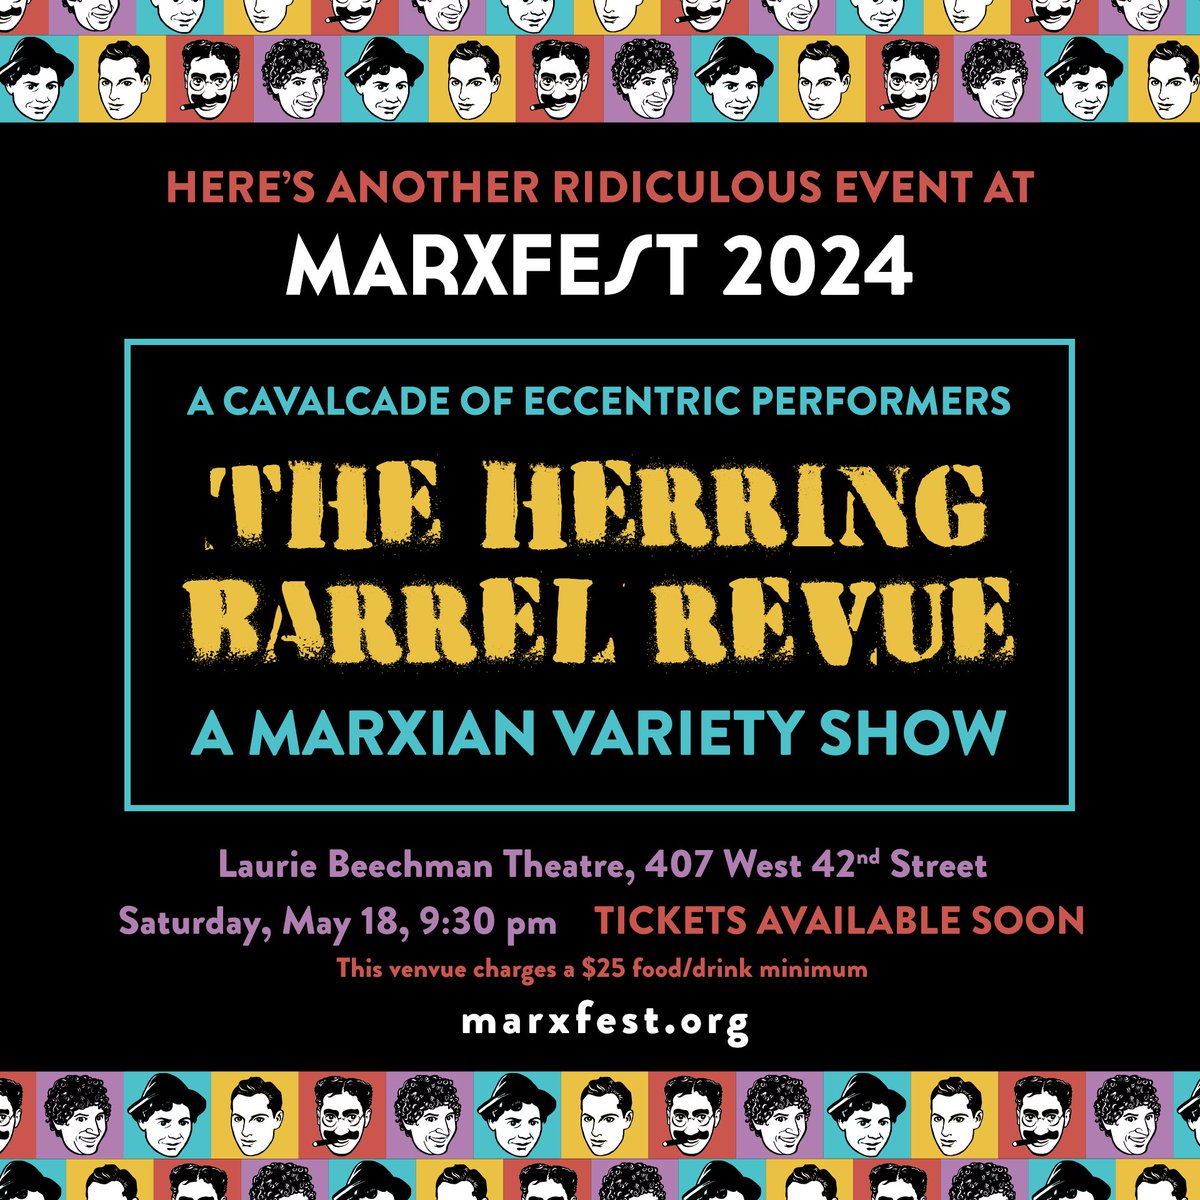 Another ridiculous event! ⭐️ THE HERRING BARREL REVUE @travsd @noahdiamond & @jonnyporkpie, together again for the first time, present a night of Marxian shenanigans & a cavalcade of eccentric entertainers. At some point we're going to run out of great events to announce, right?!